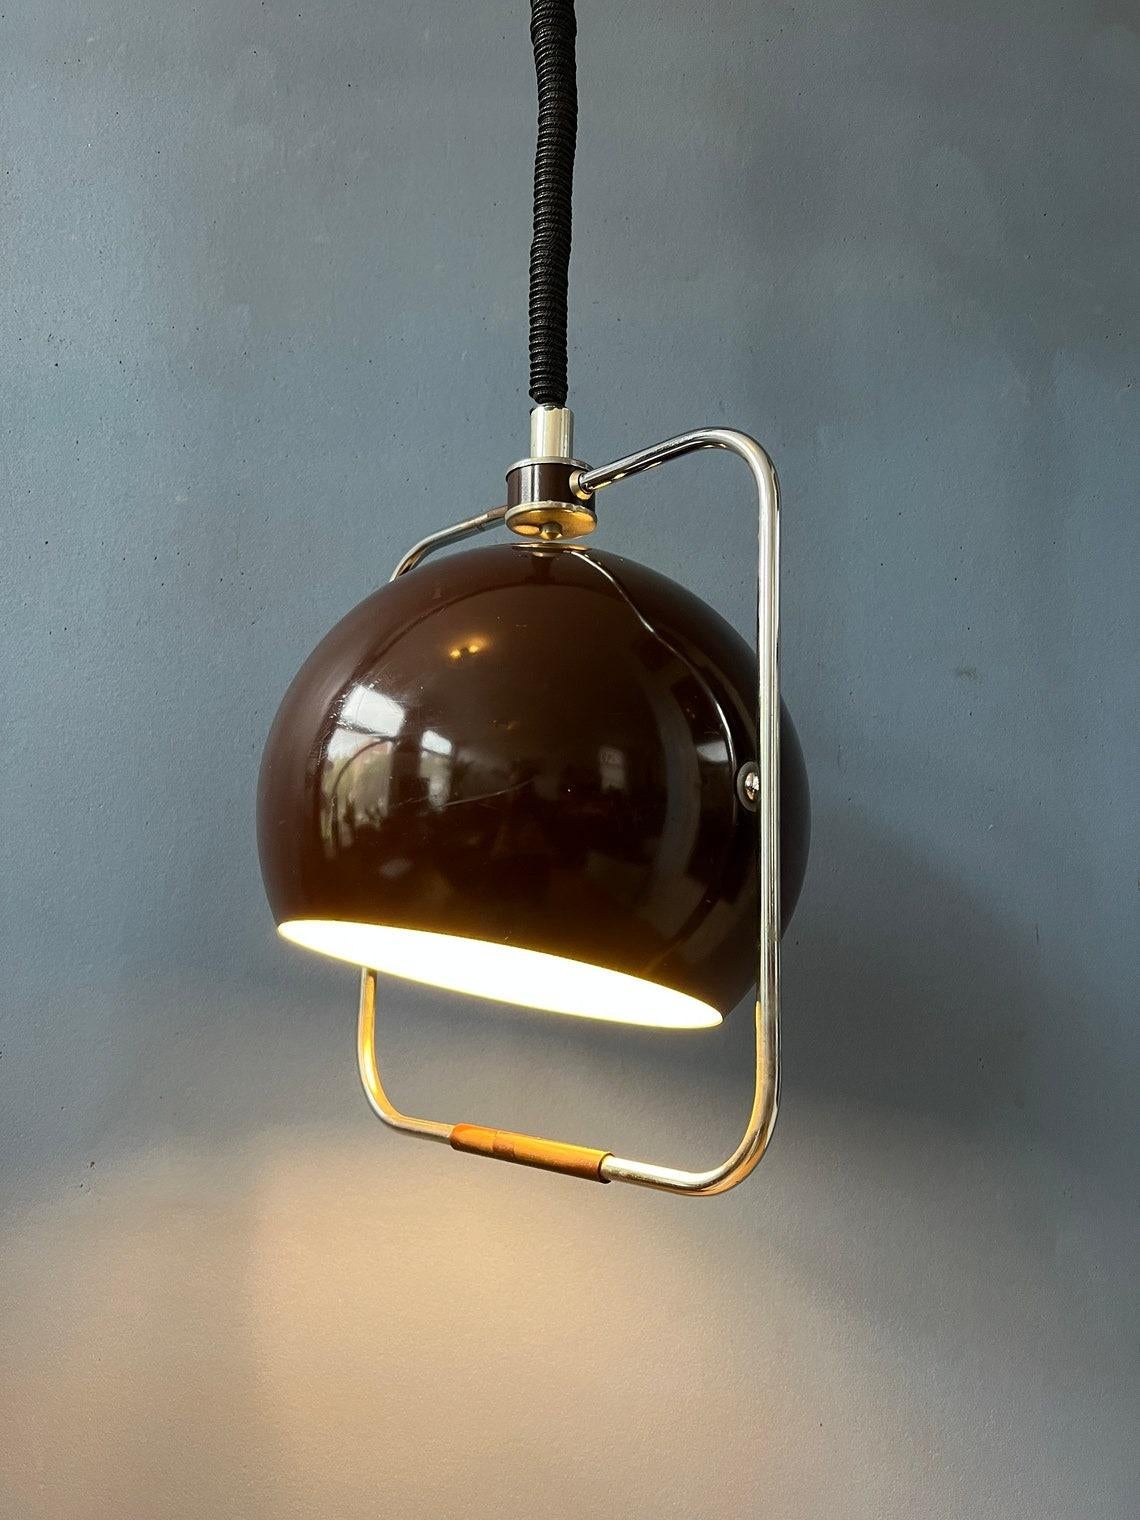 Vintage space age eyeball pendant lamp by GEPO in brown colour. This playful lamp can turn the shade all the way around its axis. The lamp is made out of metal and aluminium. The lamp has an E27/26 fitting.

Additional information:
Materials: